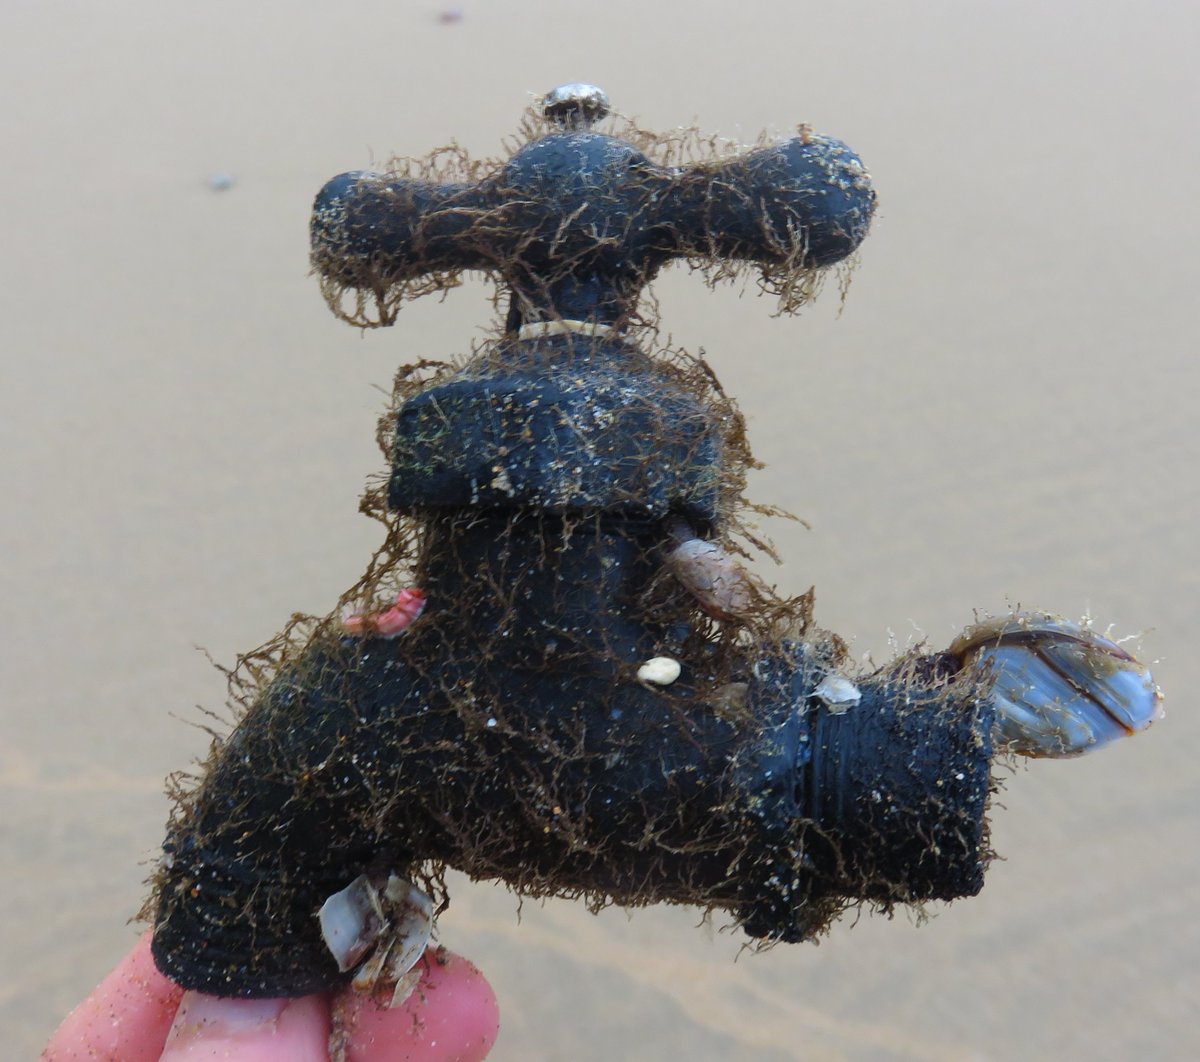 Now there's a first - #goosebarnacles on tap! @mcsuk @CornwallNature